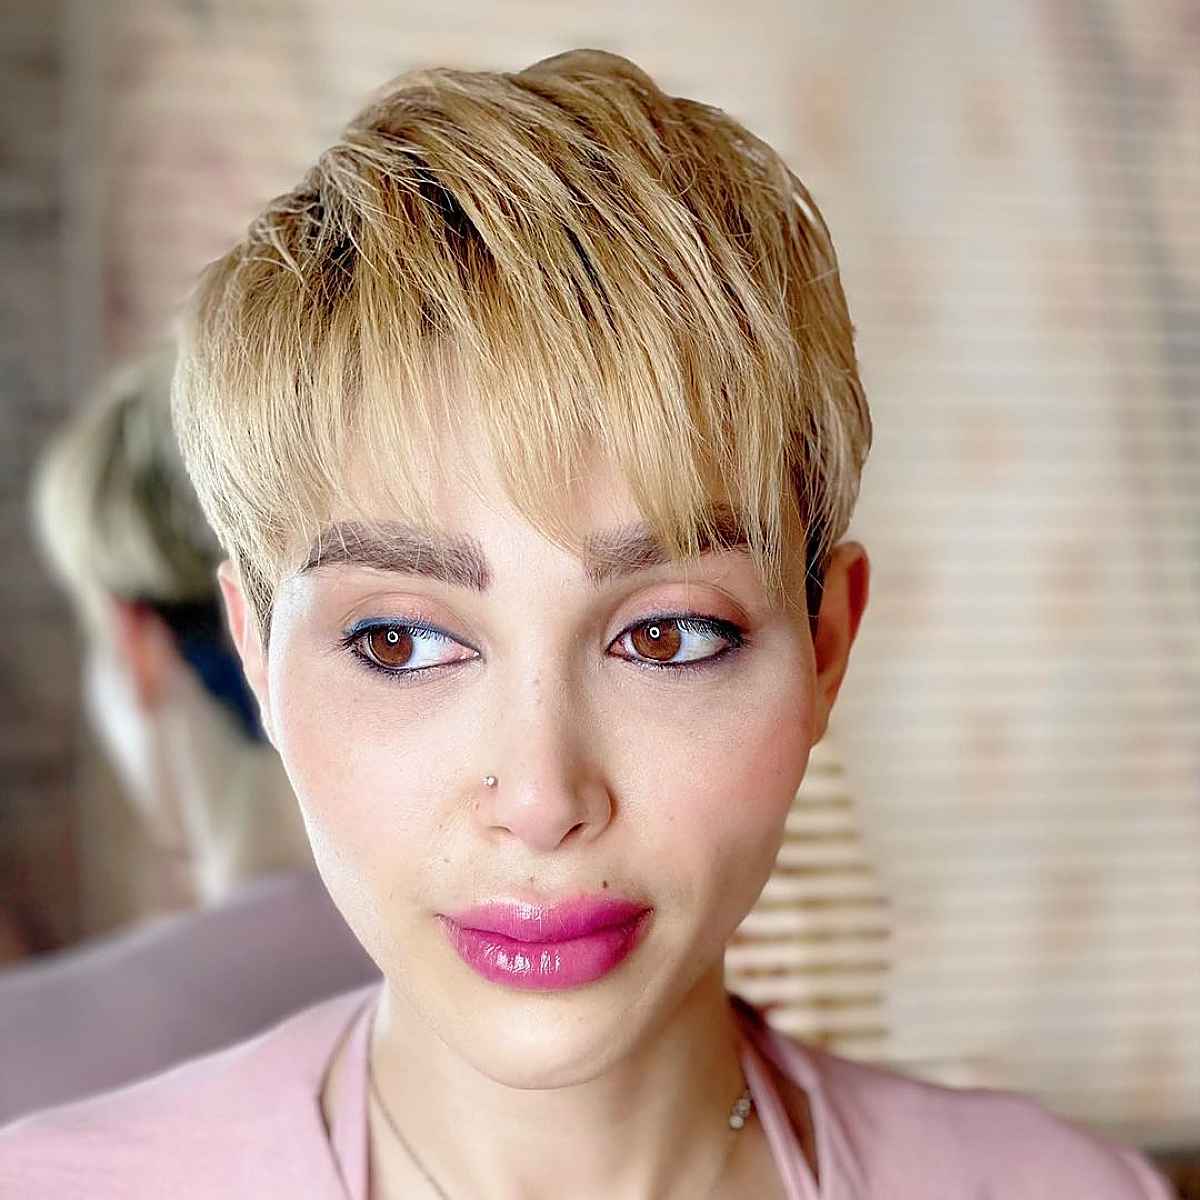 27 Low-Maintenance Short Haircuts for a Trendy, Yet Time-Saving Look